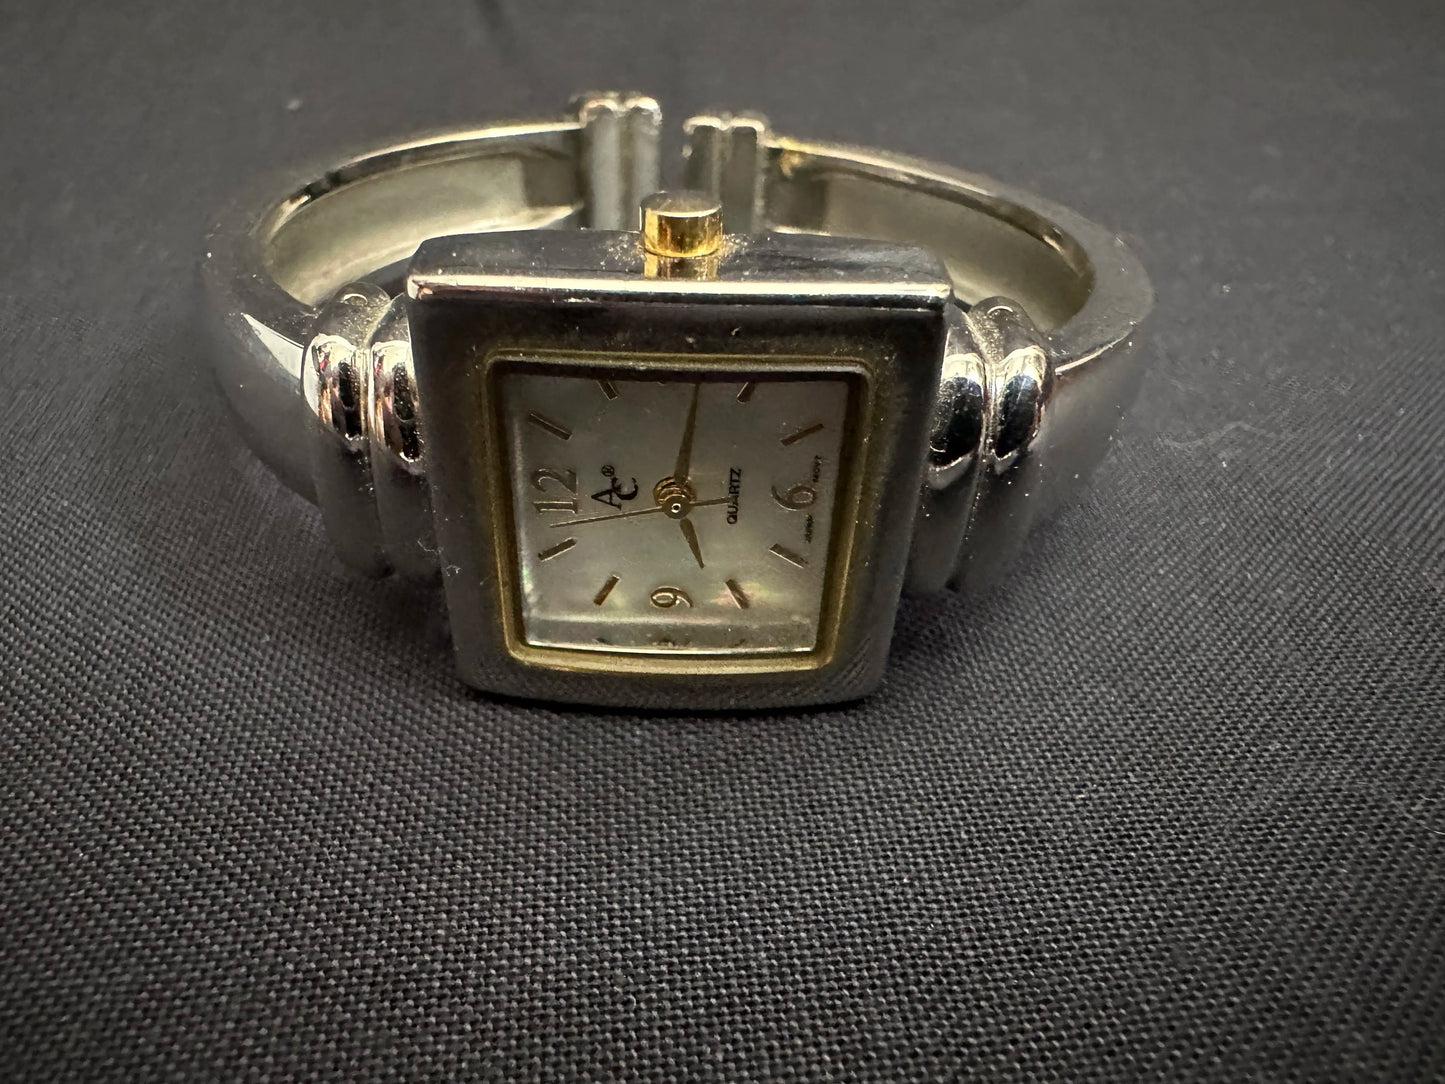 AC Silver Watch - PL27875 - Side View